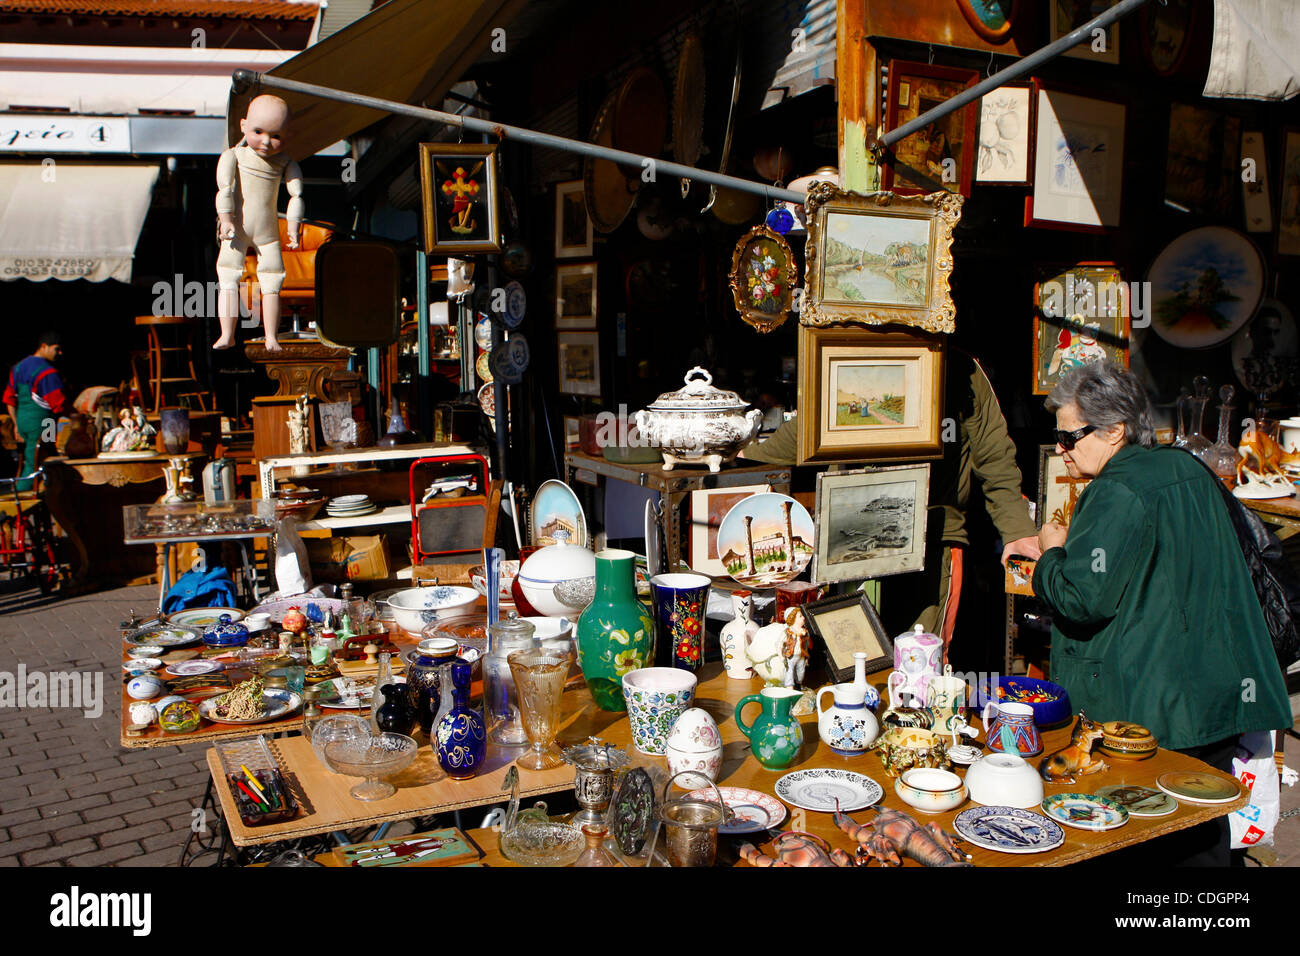 Jan. 18, 2011 - Athens, Greece - Flea market in Monastiraki is one of the  most charming neighbourhoods of Athens, you can find clothes, antiques,  such as furniture, hand painted wooden trunks,